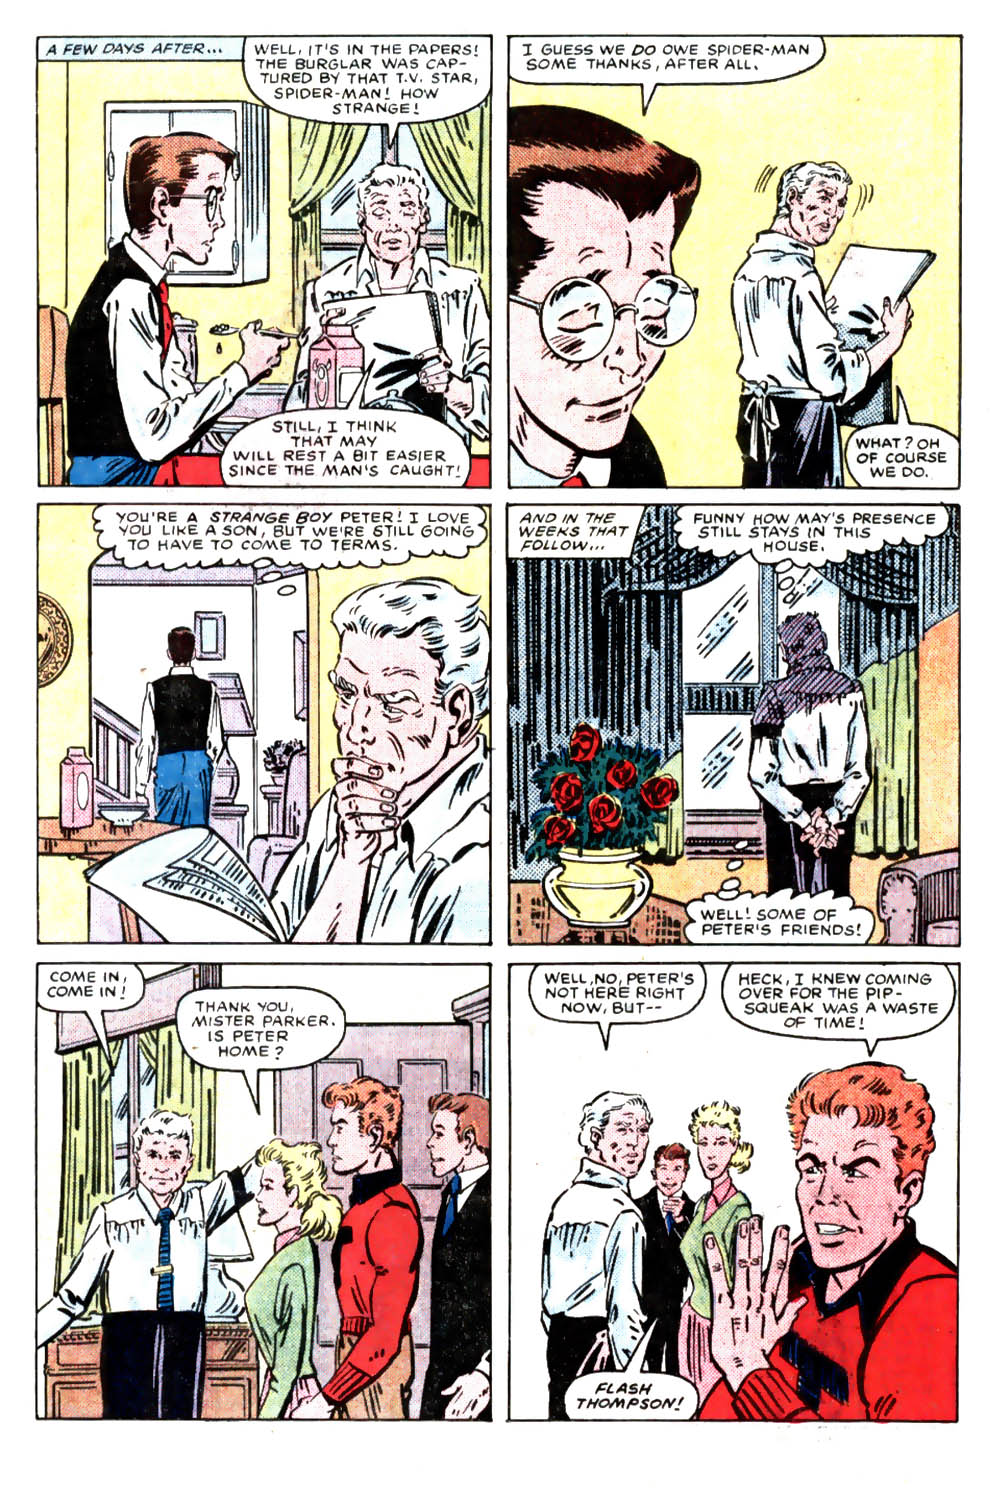 What If? (1977) issue 46 - Spiderman's uncle ben had lived - Page 8